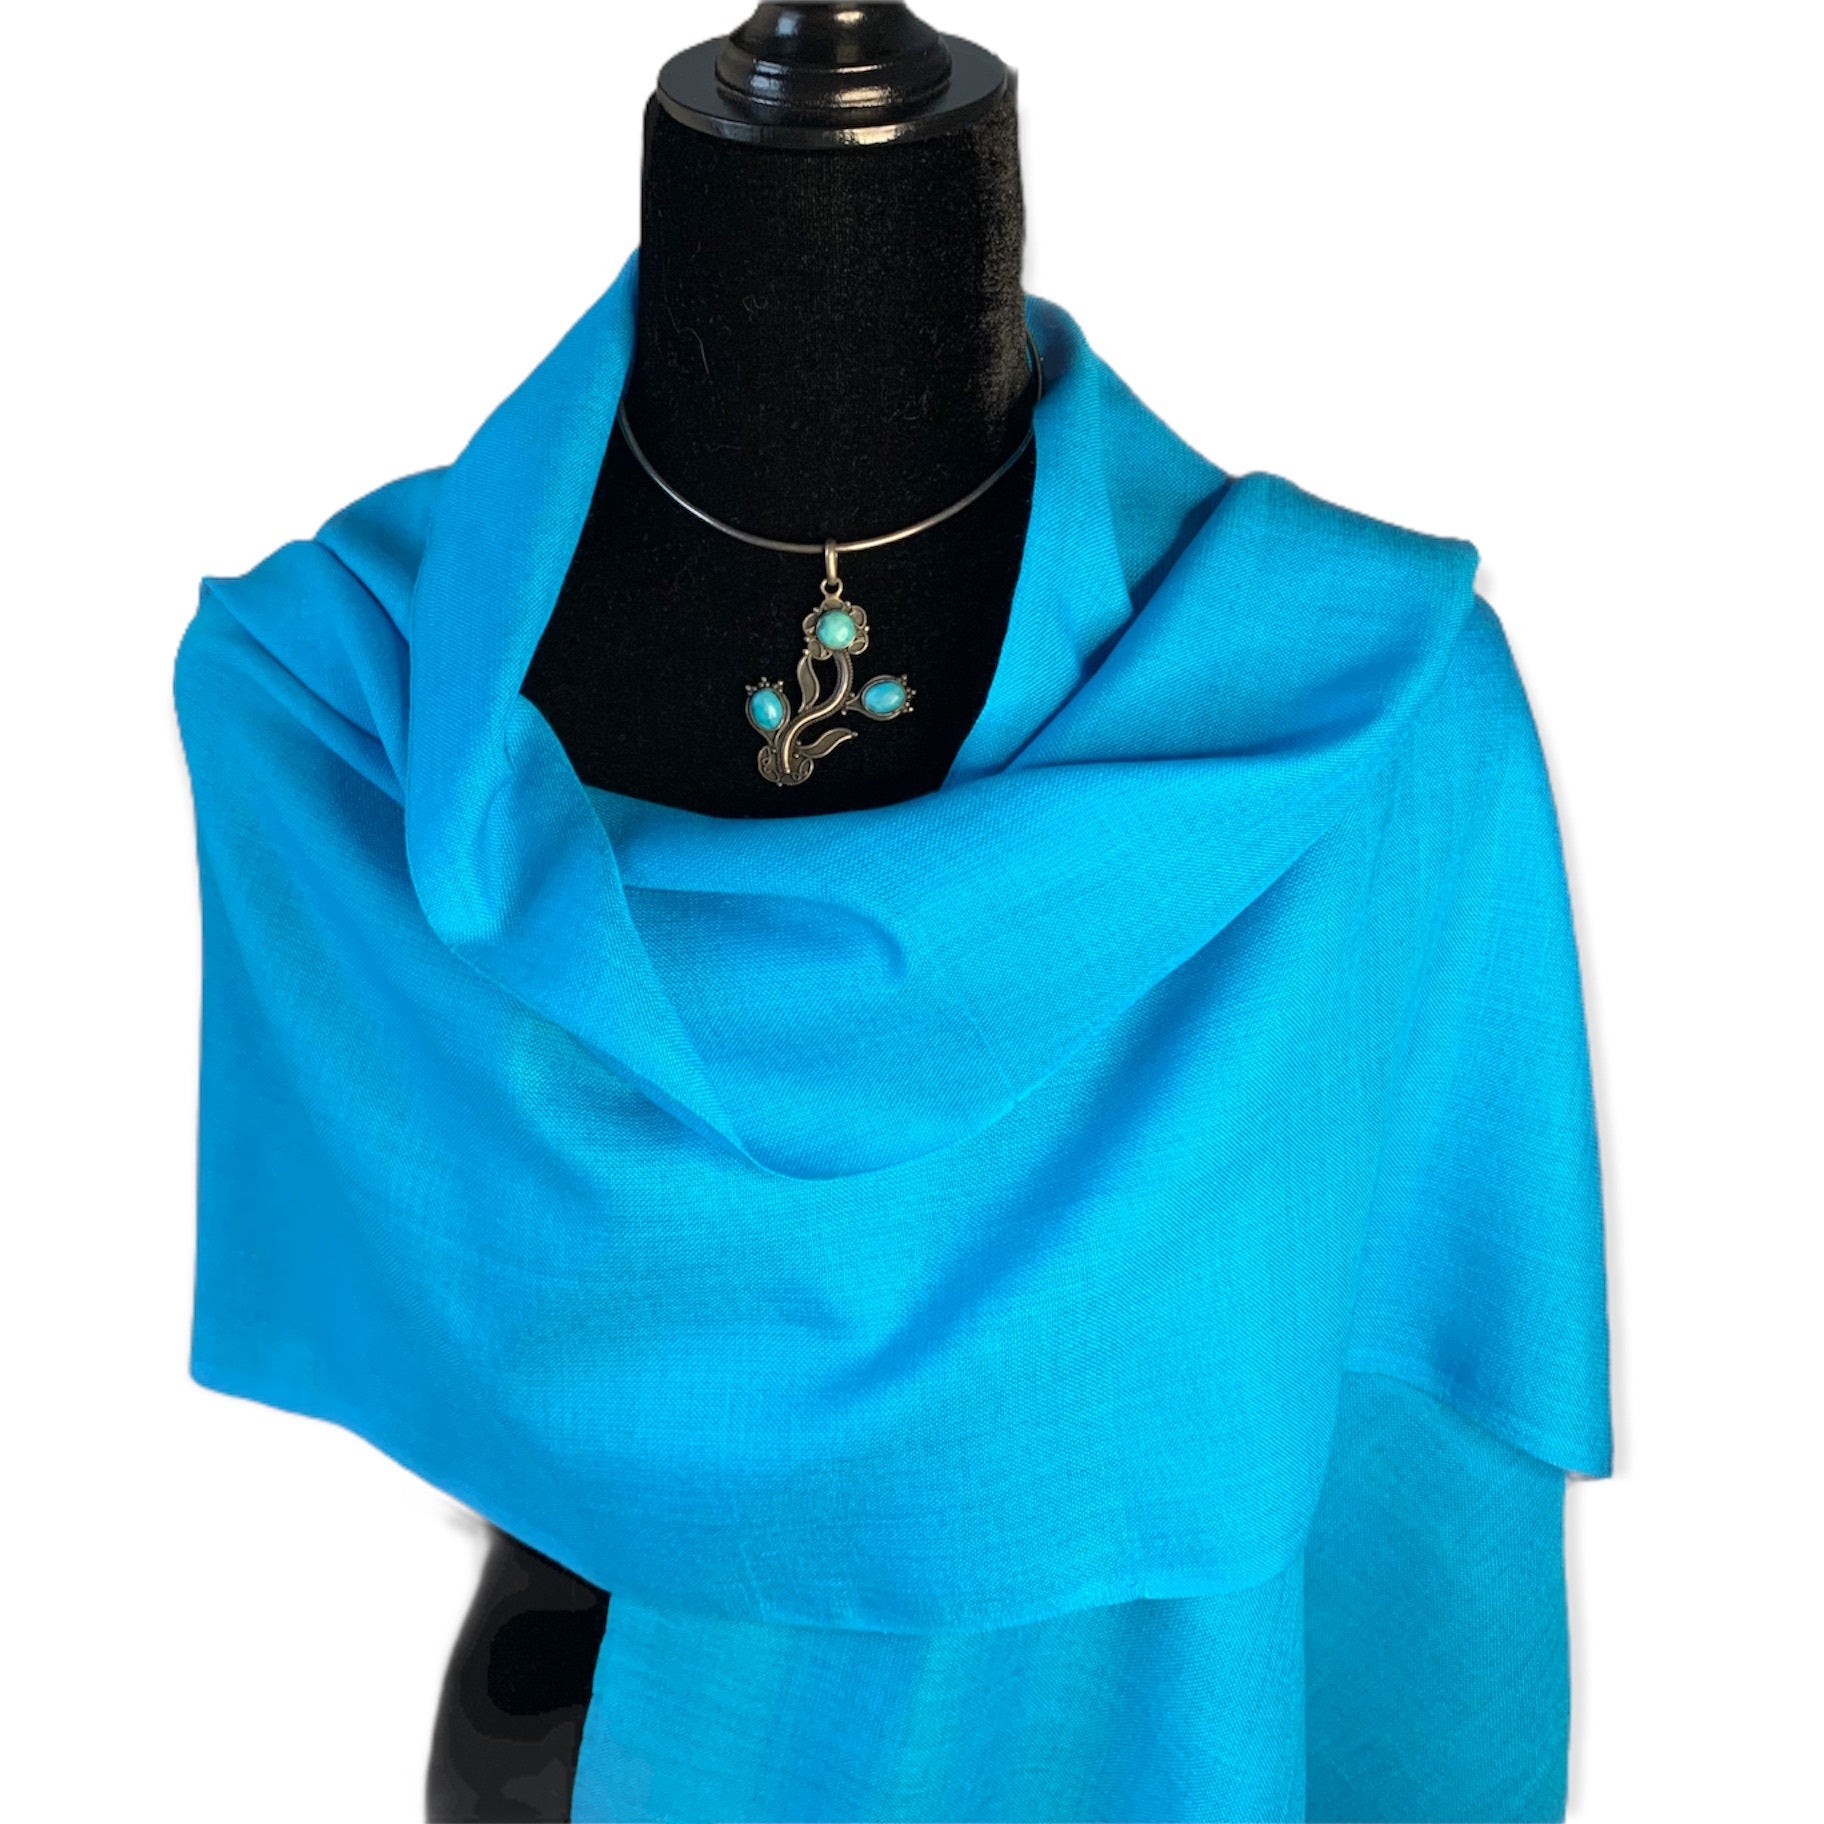 Small Solid Handwoven Scarf Turquoise - Handmade by Artisans 